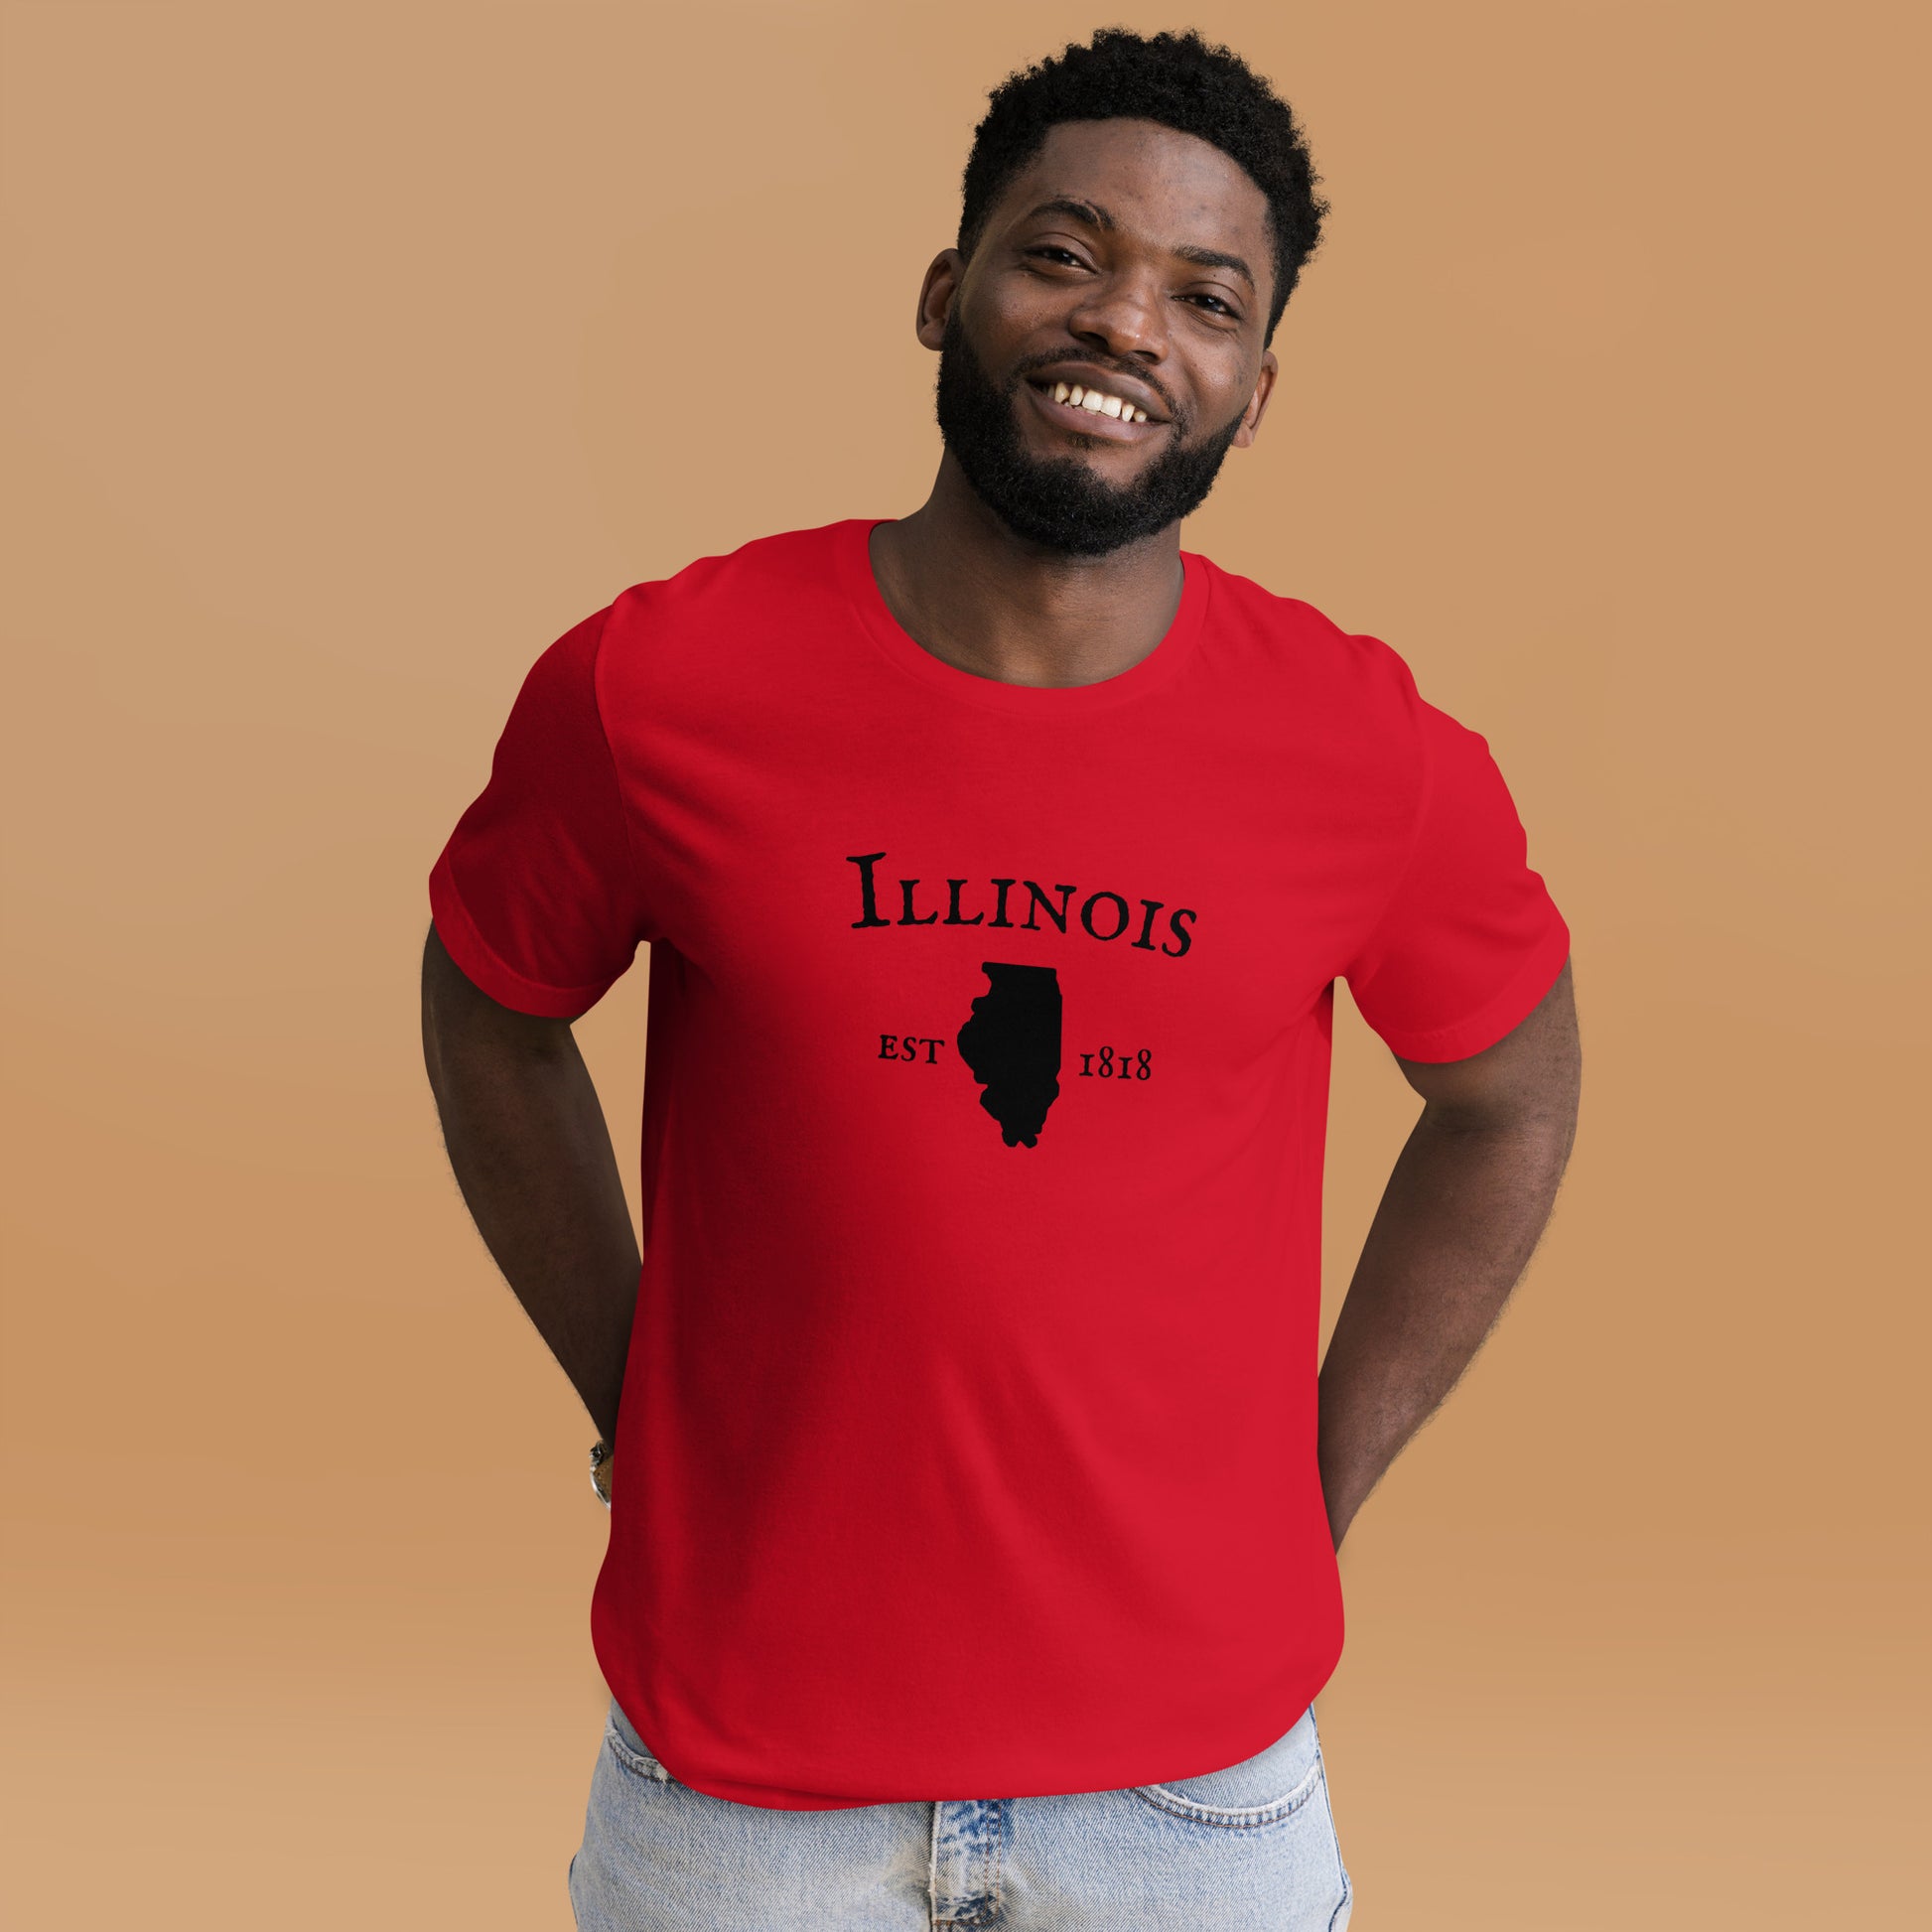 "Illinois Established In 1818" T-Shirt - Weave Got Gifts - Unique Gifts You Won’t Find Anywhere Else!